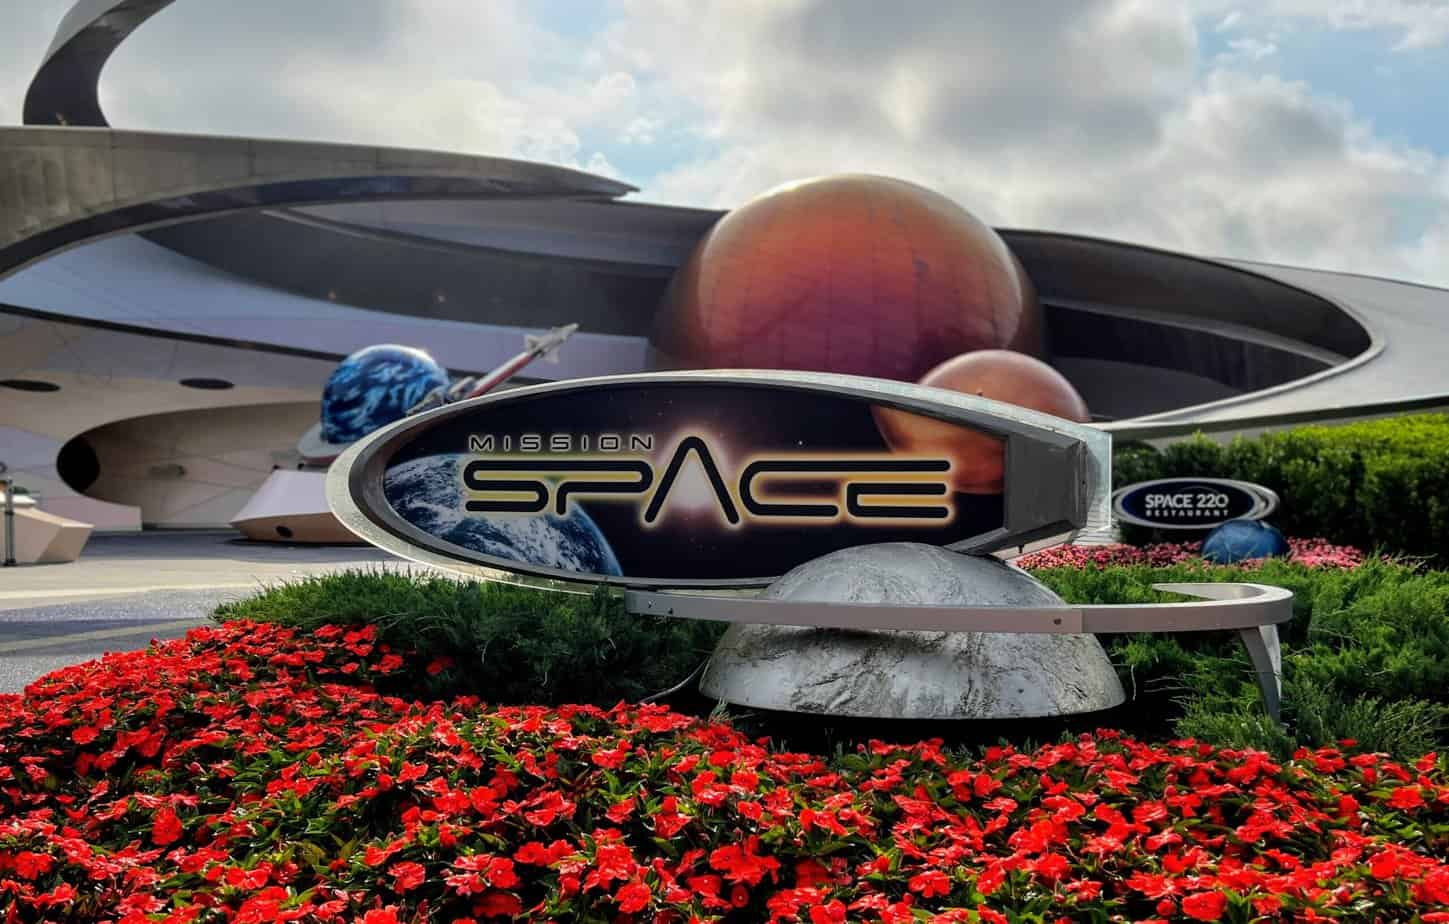 is mission space too scary for kids? parents ride guide.